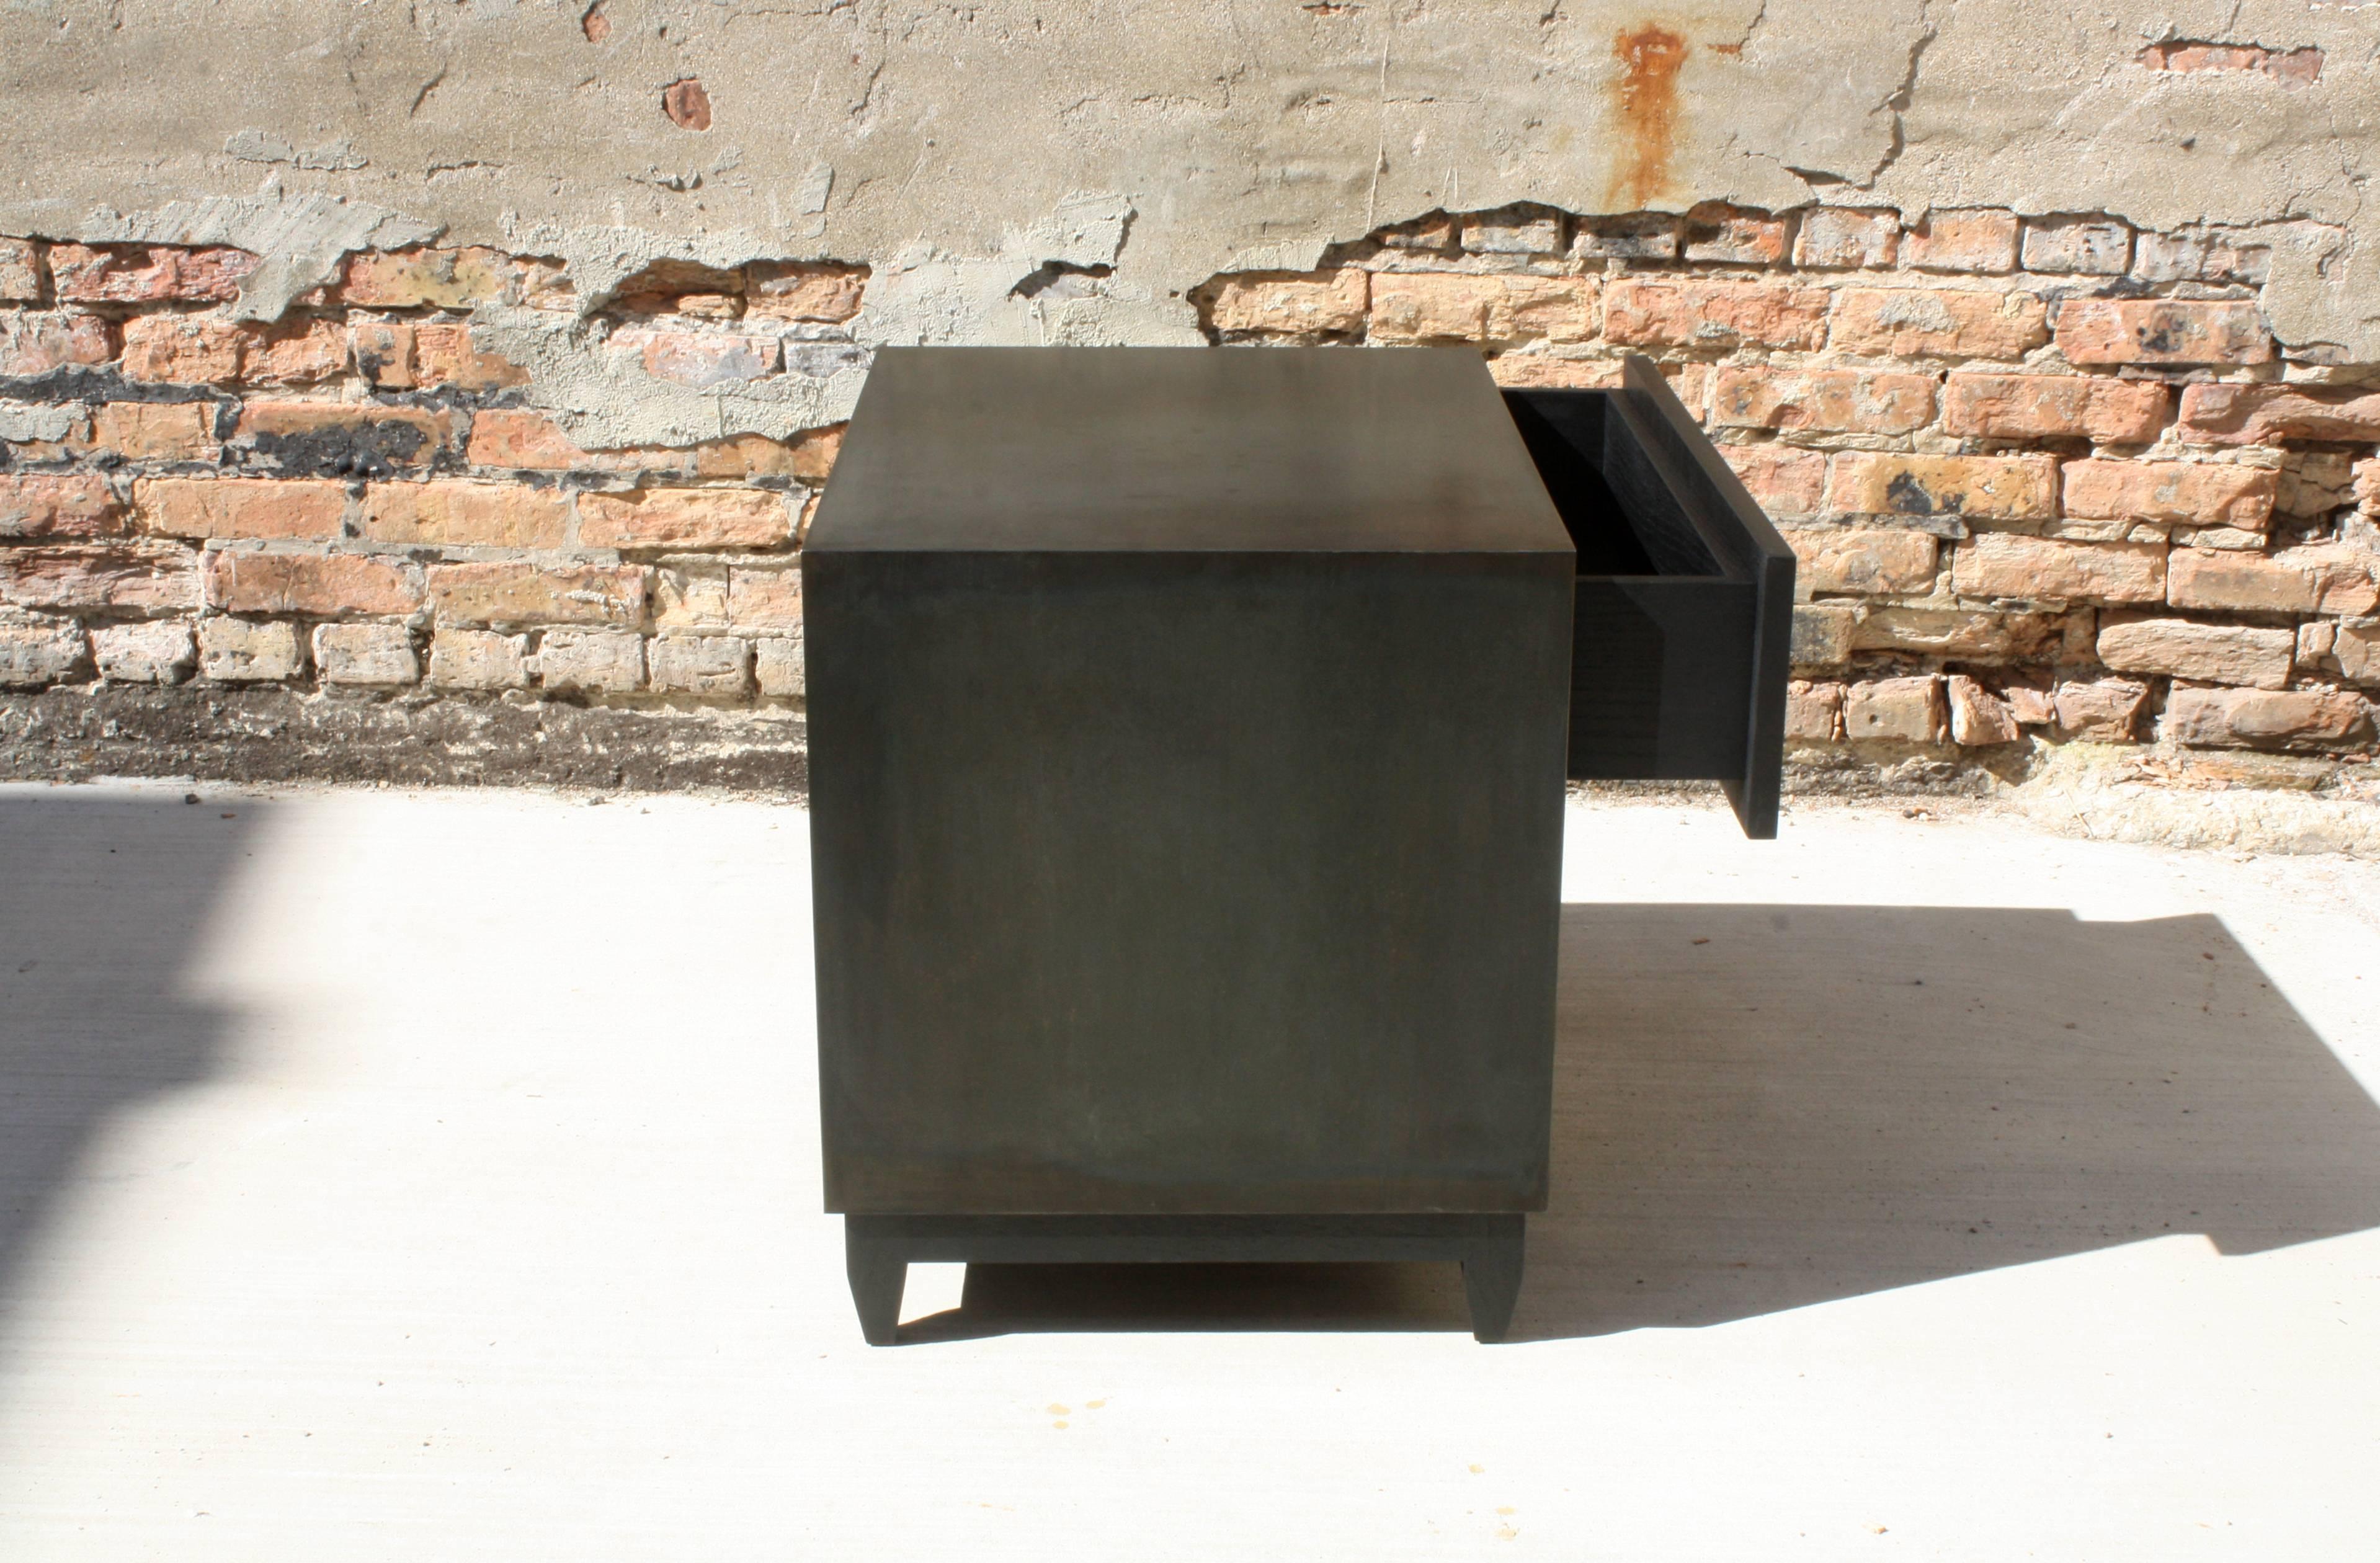 American Oxide, Handmade Nightstand or Contemporary Side Table - Blackened Steel and Wood For Sale